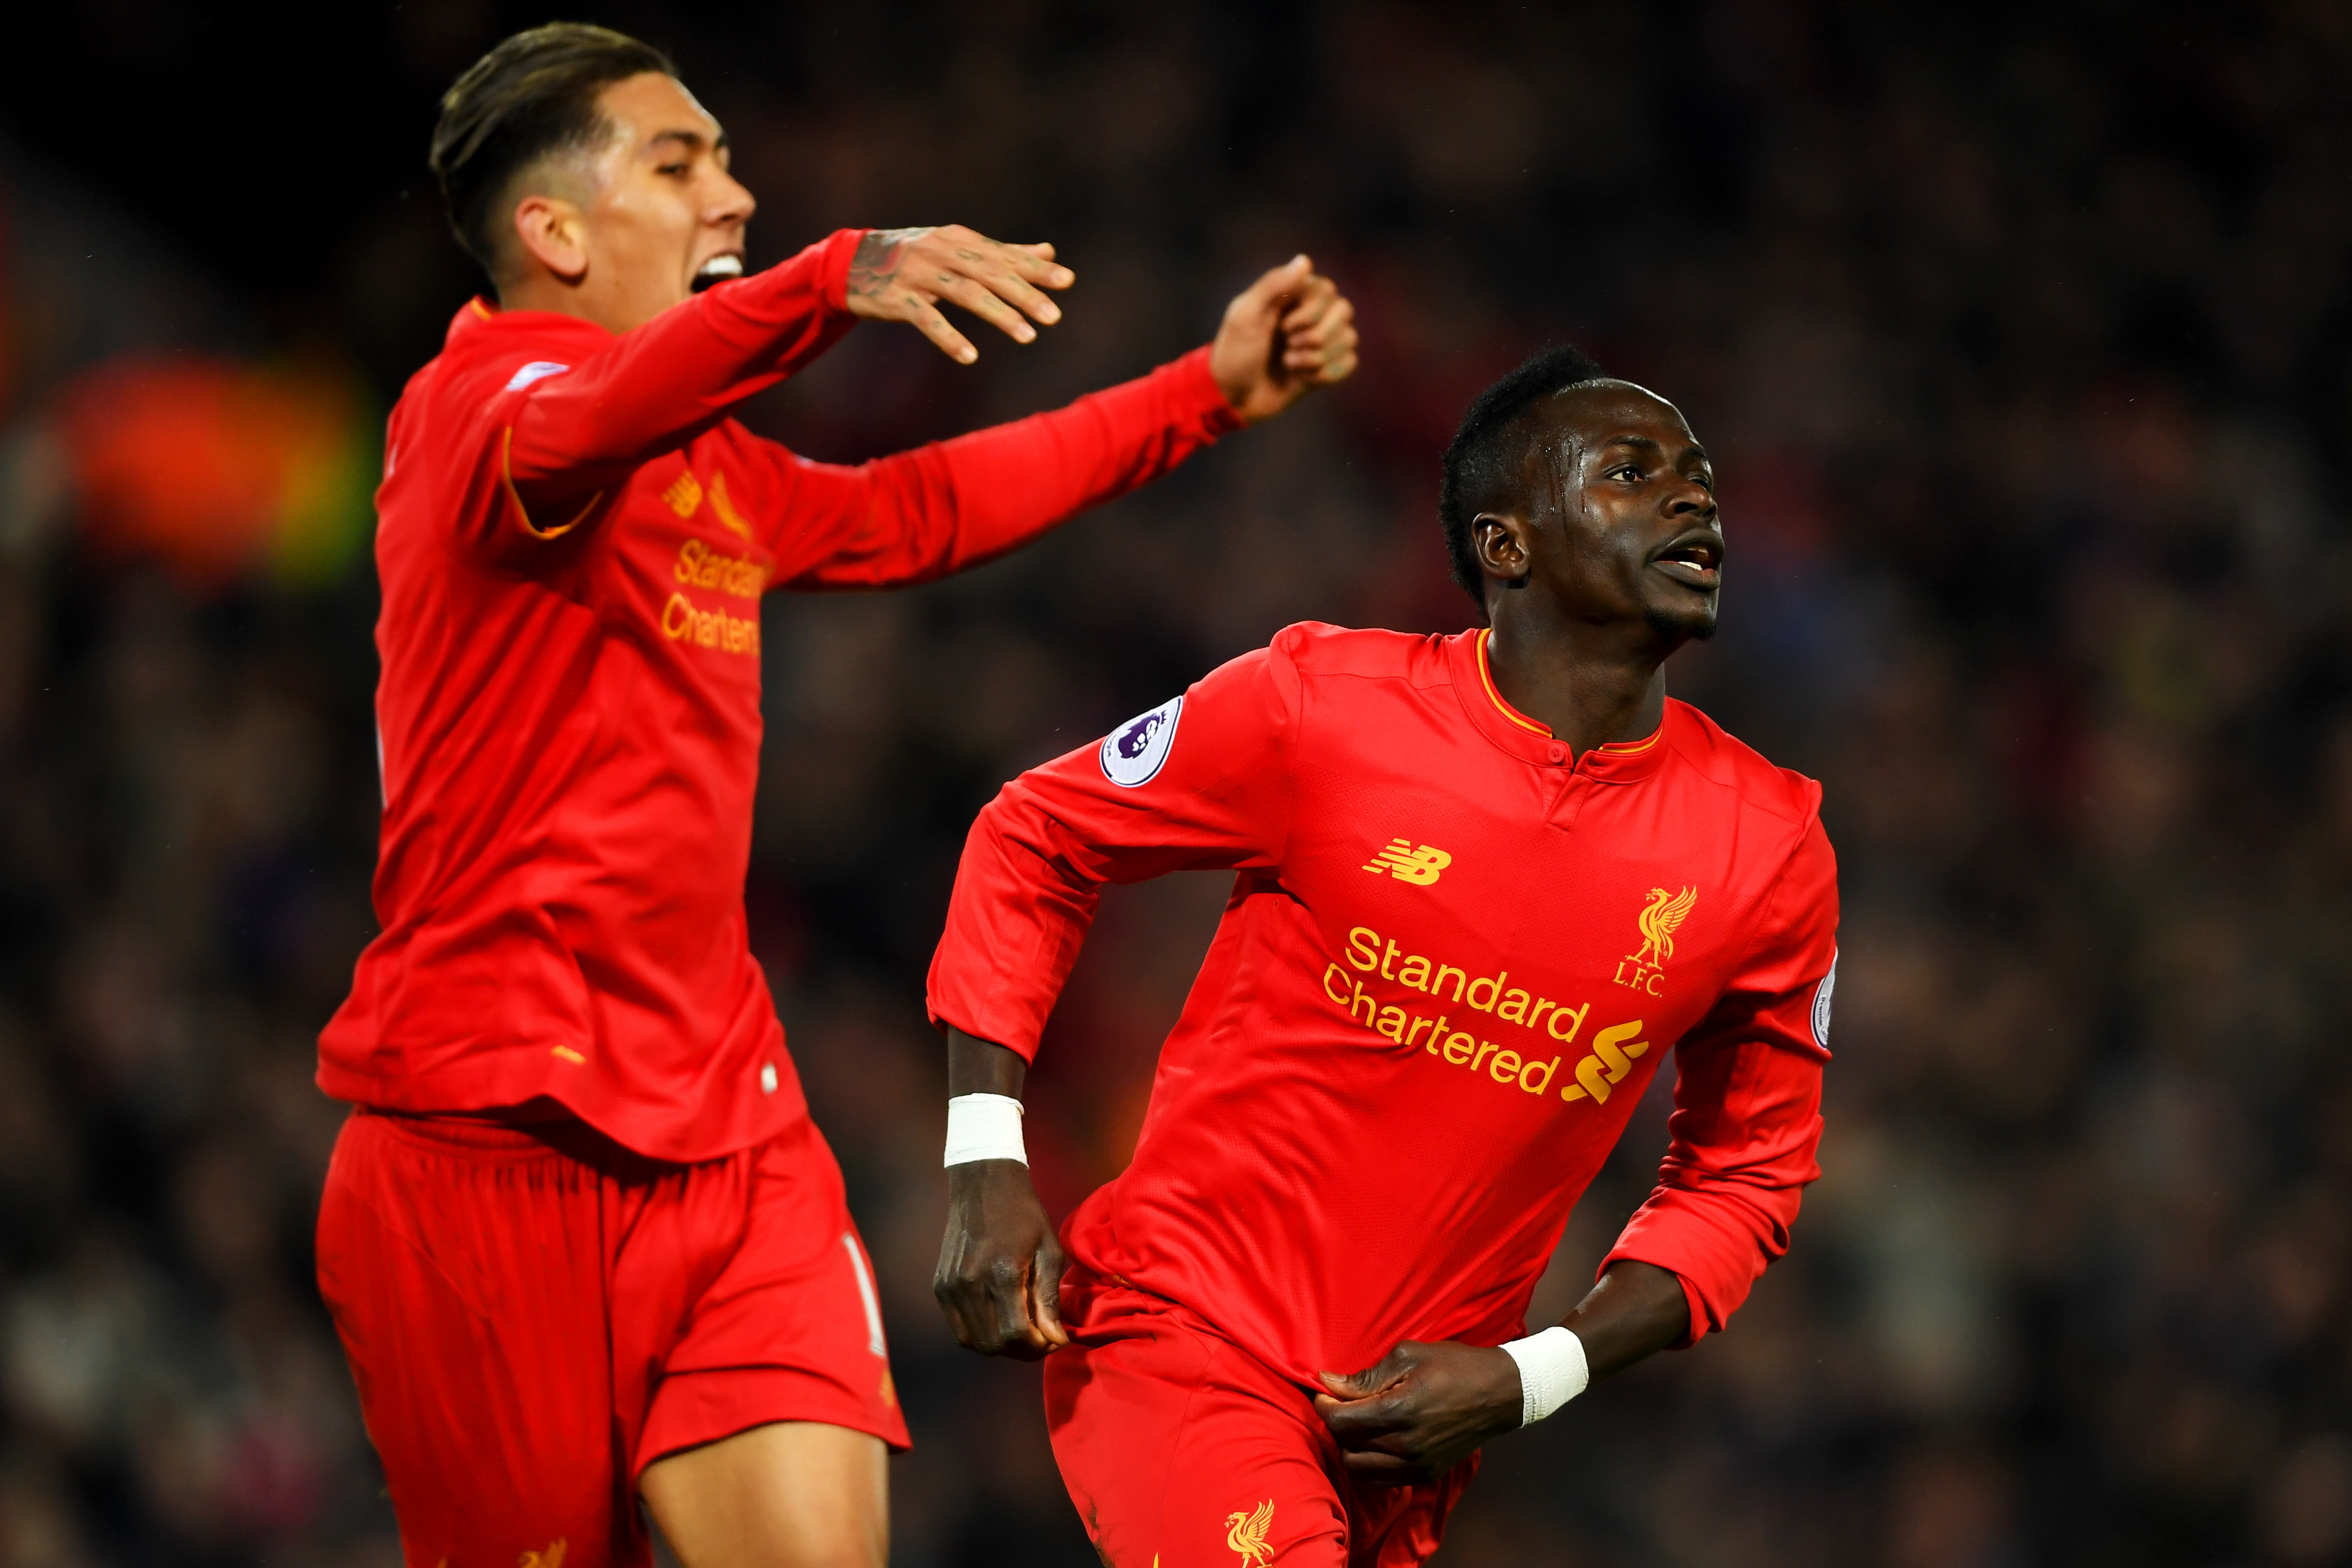 LIVERPOOL, ENGLAND - FEBRUARY 11:  Sadio Mane (R) of Liverpool celebrates scoring the oprning goal with his team mate Roberto Firmino (L) during the Premier League match between Liverpool and Tottenham Hotspur at Anfield on February 11, 2017 in Liverpool, England.  (Photo by Mike Hewitt/Getty Images for Tottenham Hotspur FC)